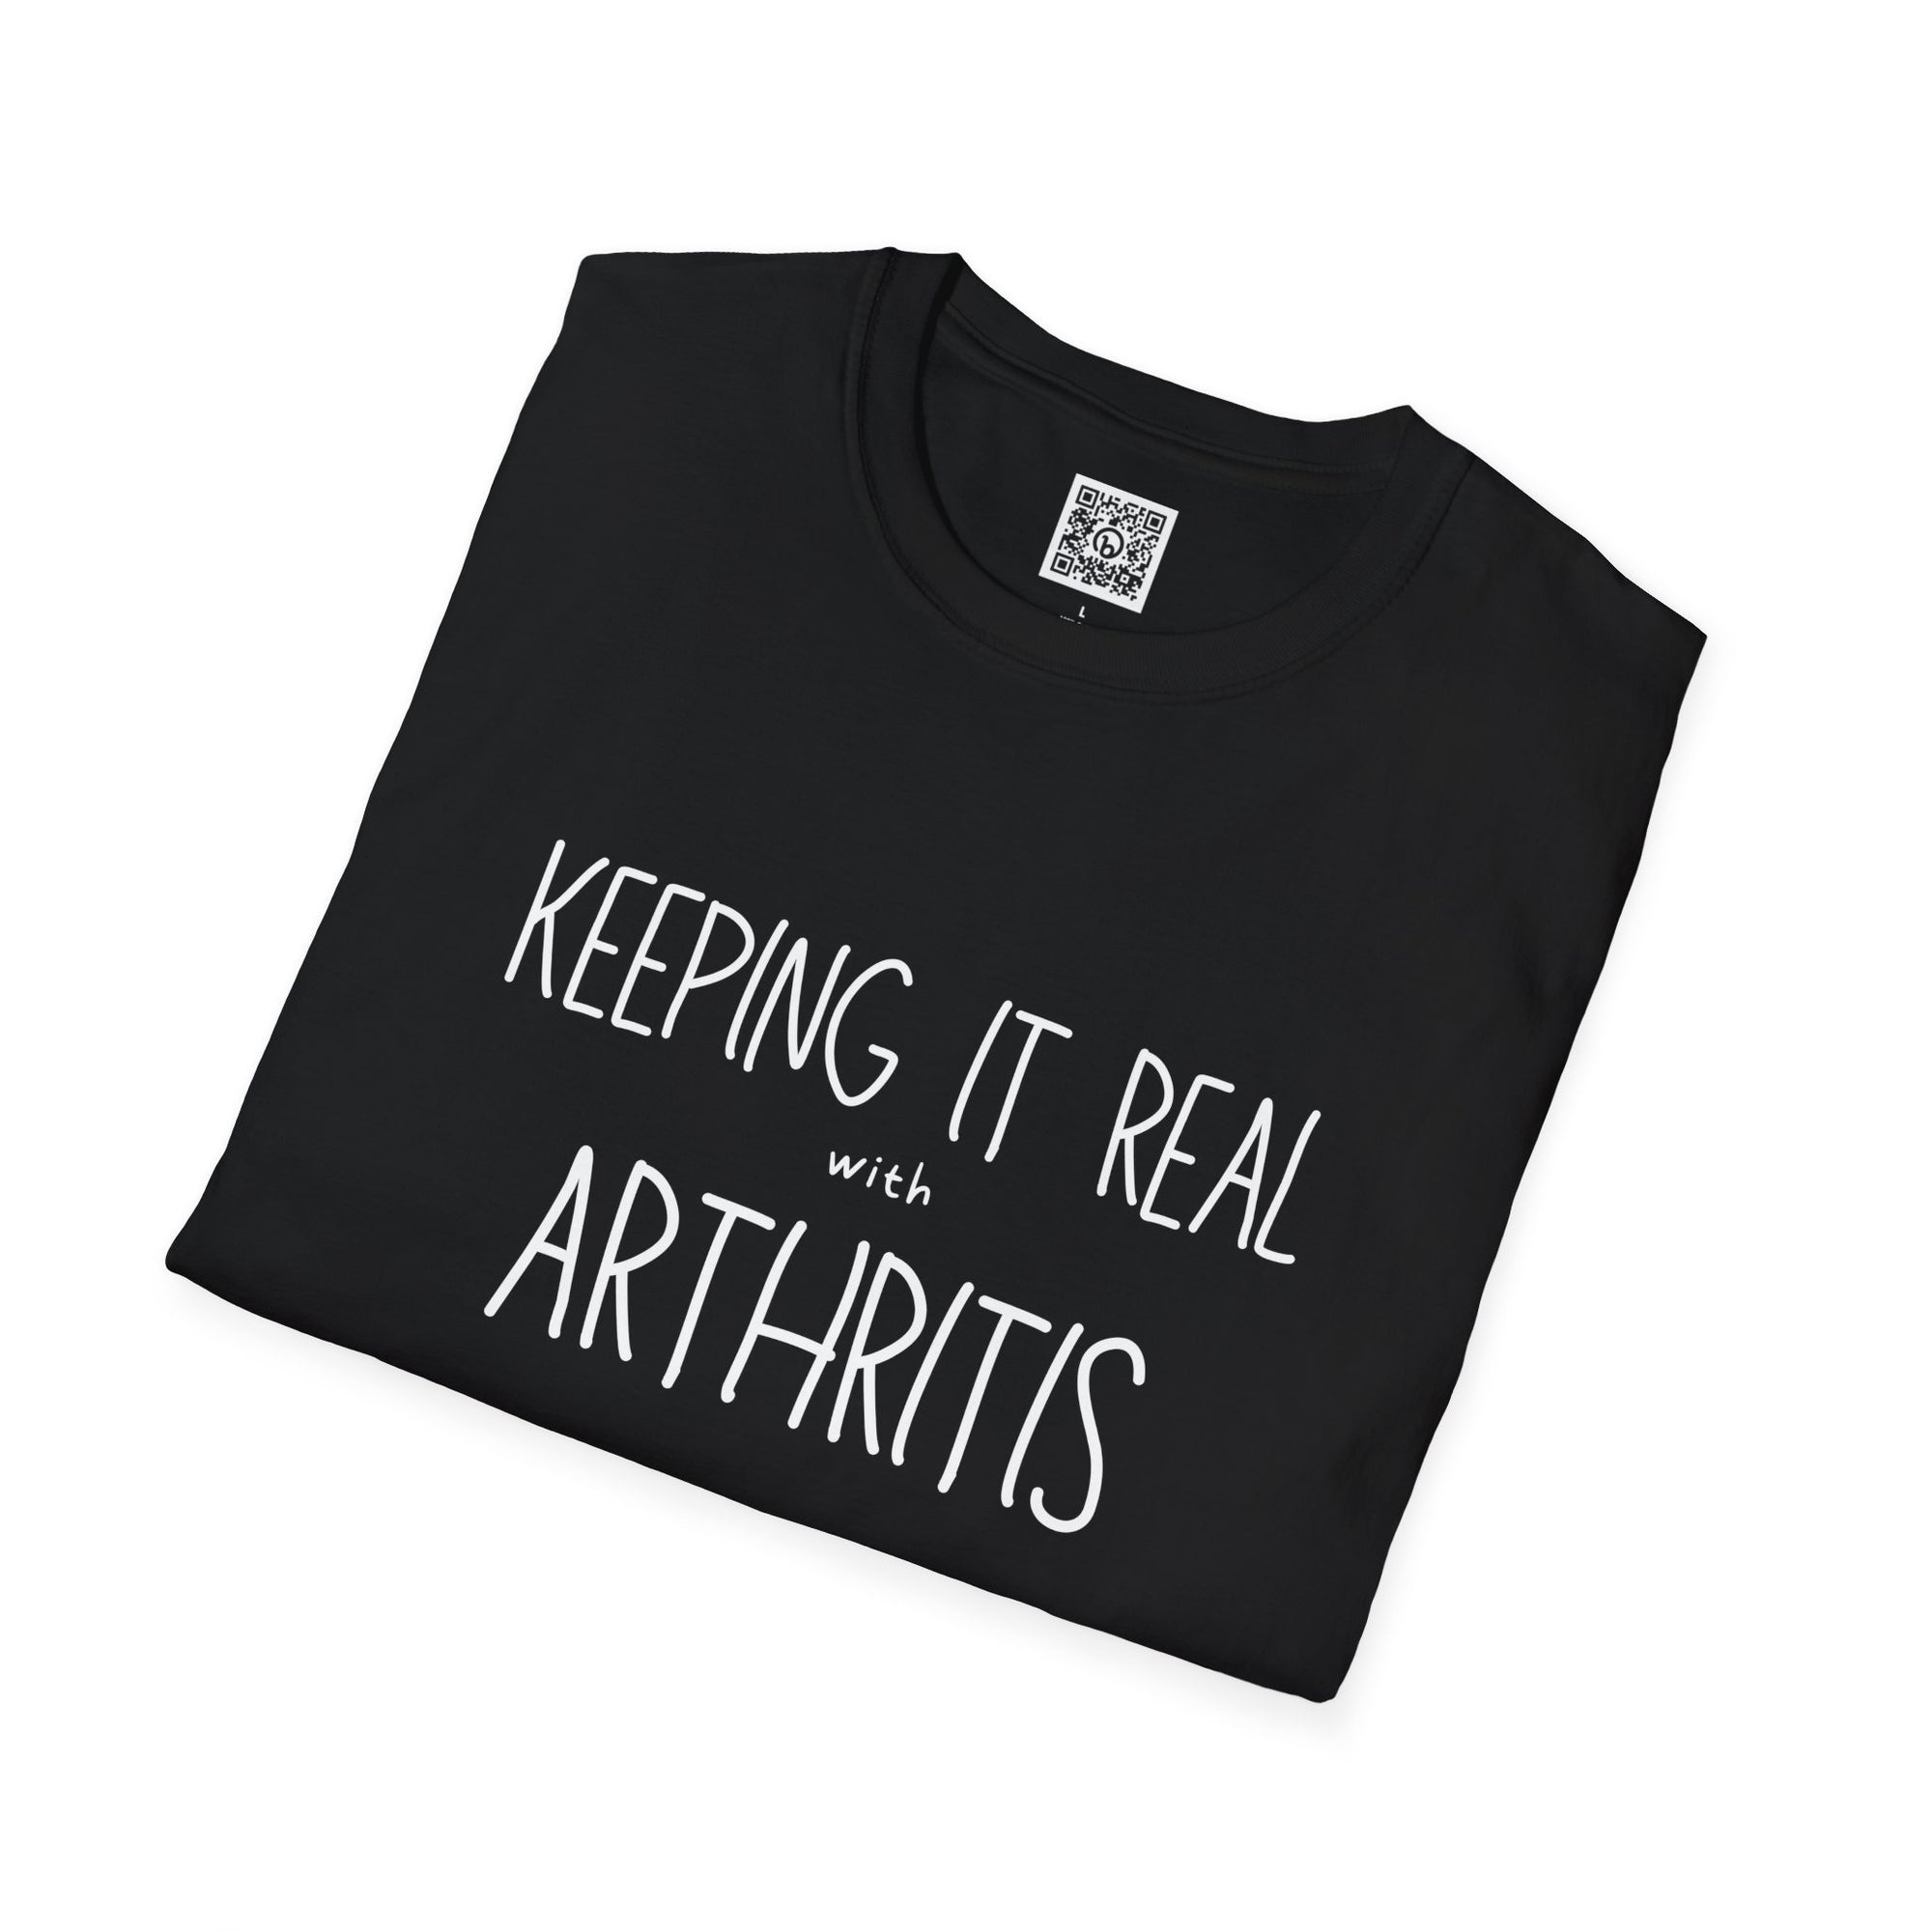 "Keeping it Real with Arthritis" + Arthritis Facts T-Shirt